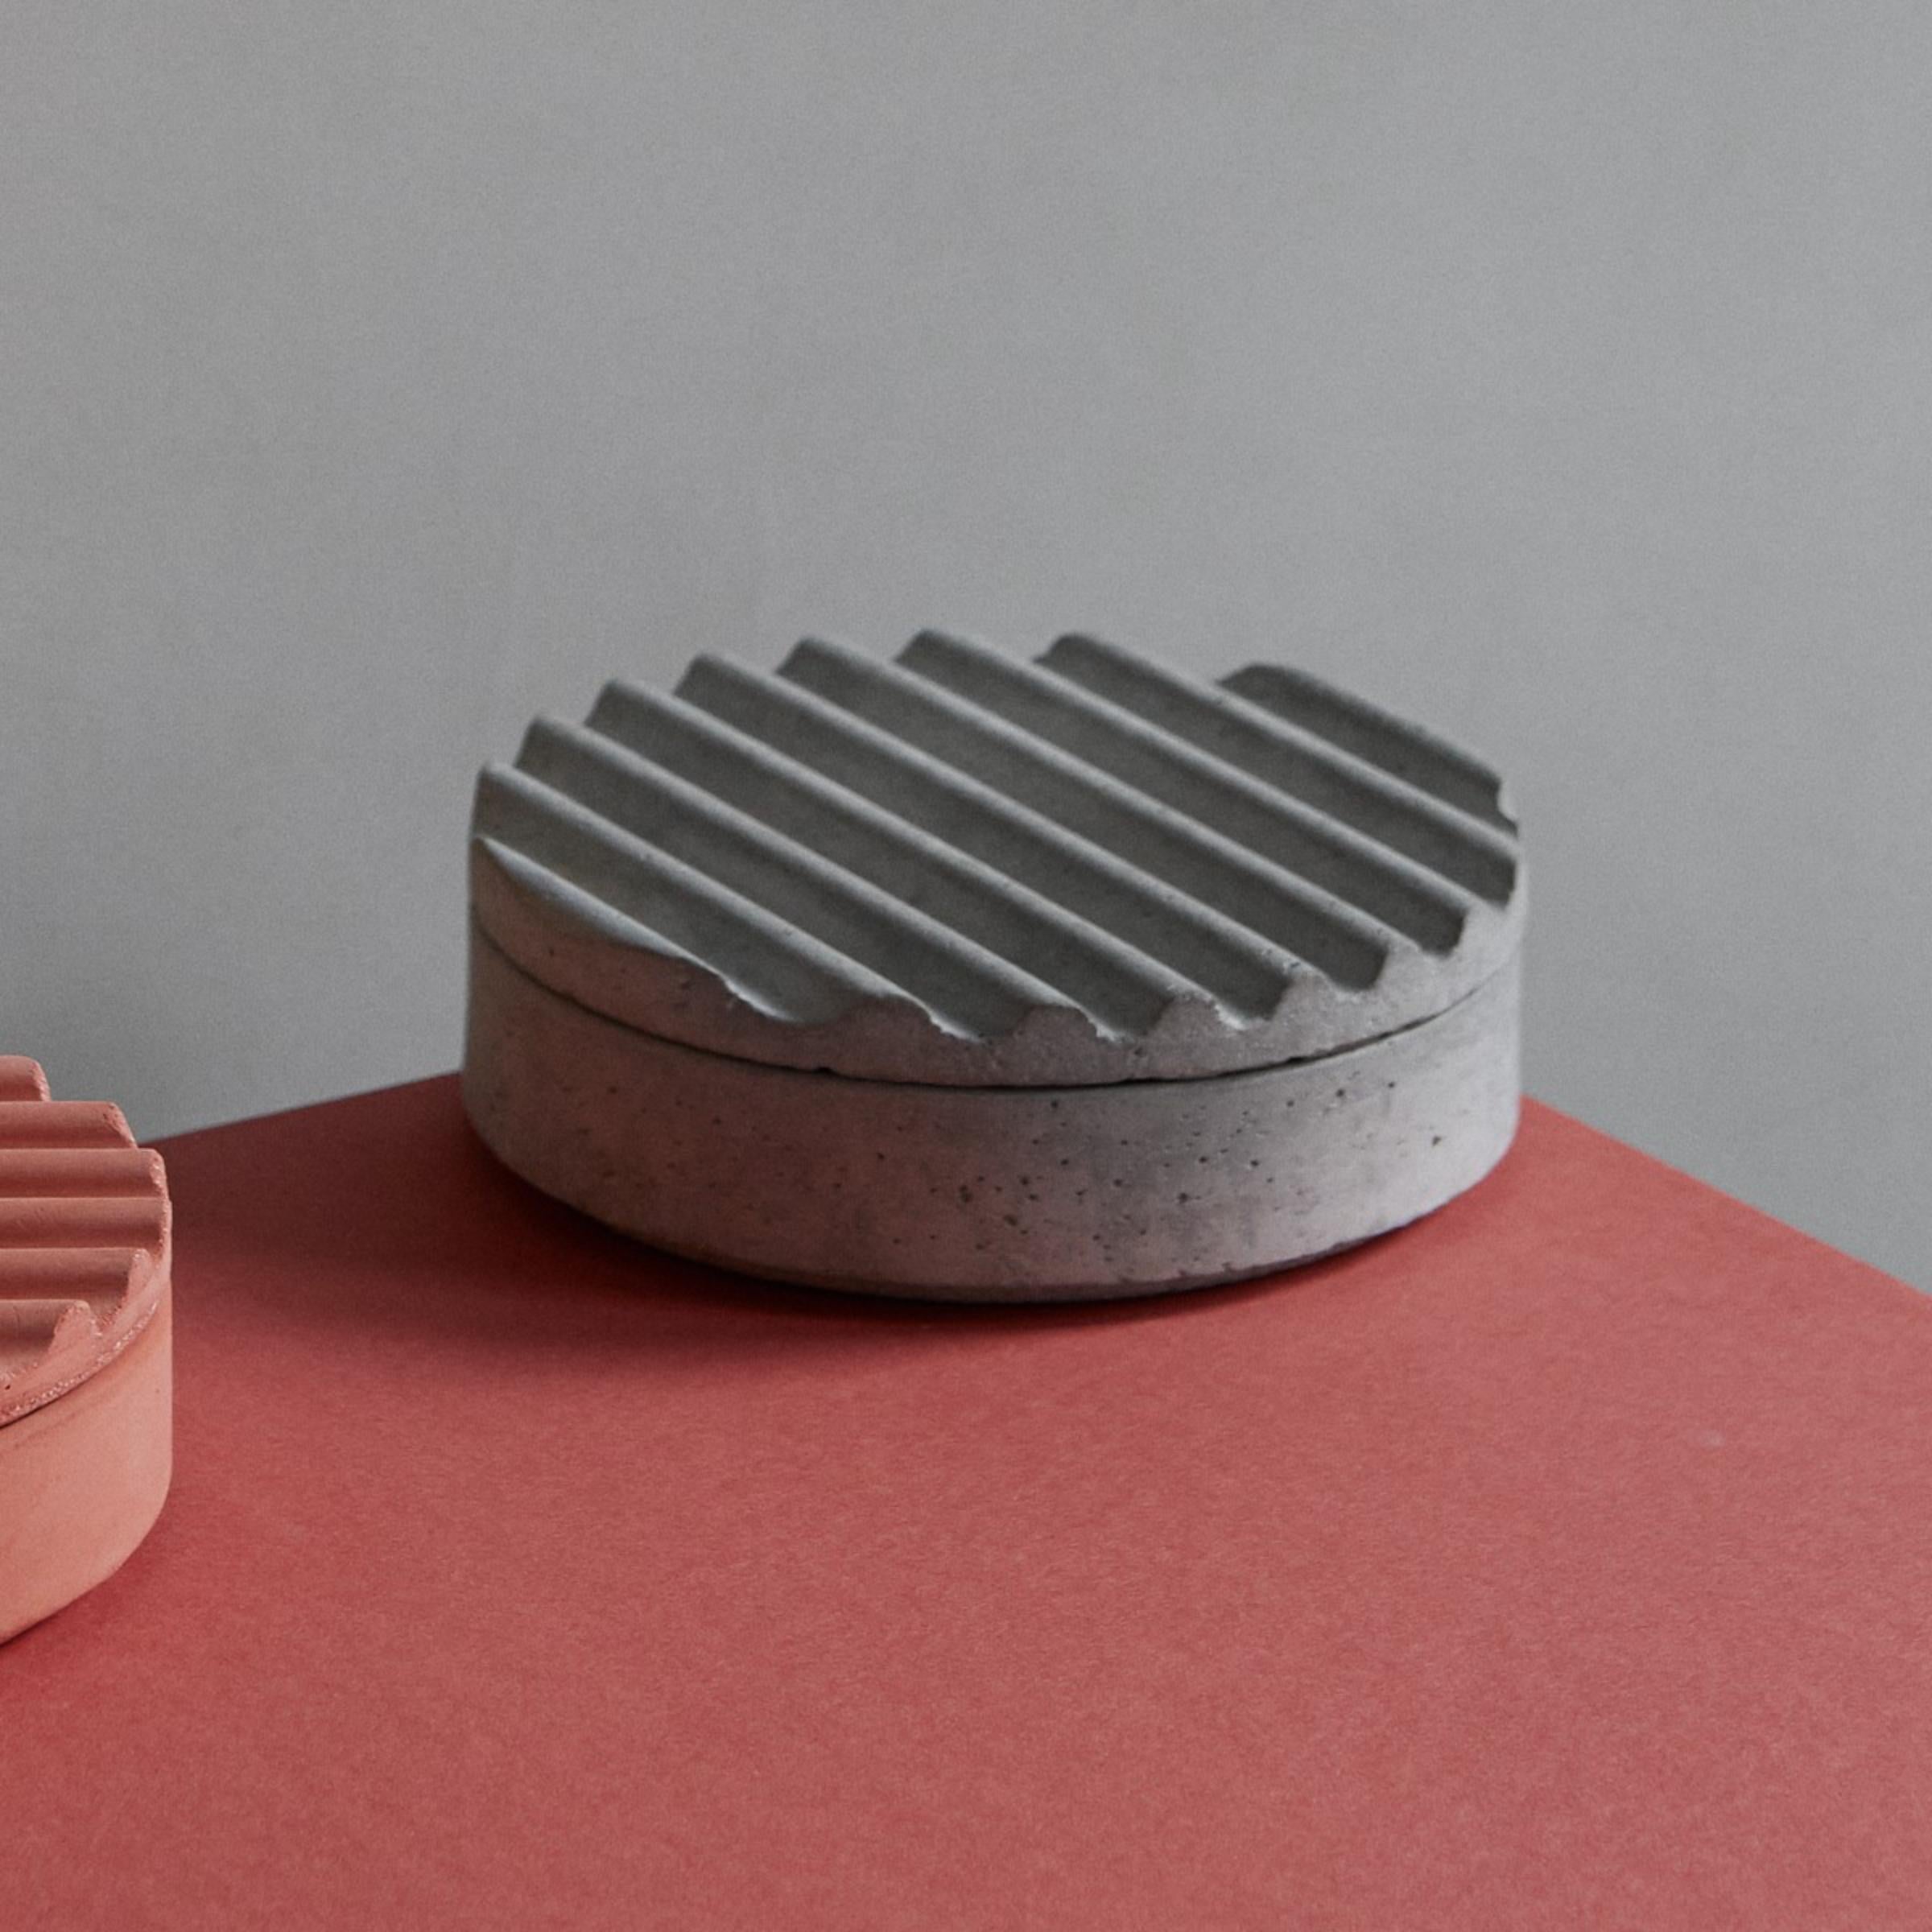 Set of 2 ripple vessels by Derya Arpac
Dimensions: D 17 x H 7 cm
Materials: Pigmented Concrete
Also available: Other colours available.

Derya Arpac is a Copenhagen based architect and furniture designer.
She holds a Master of Arts in